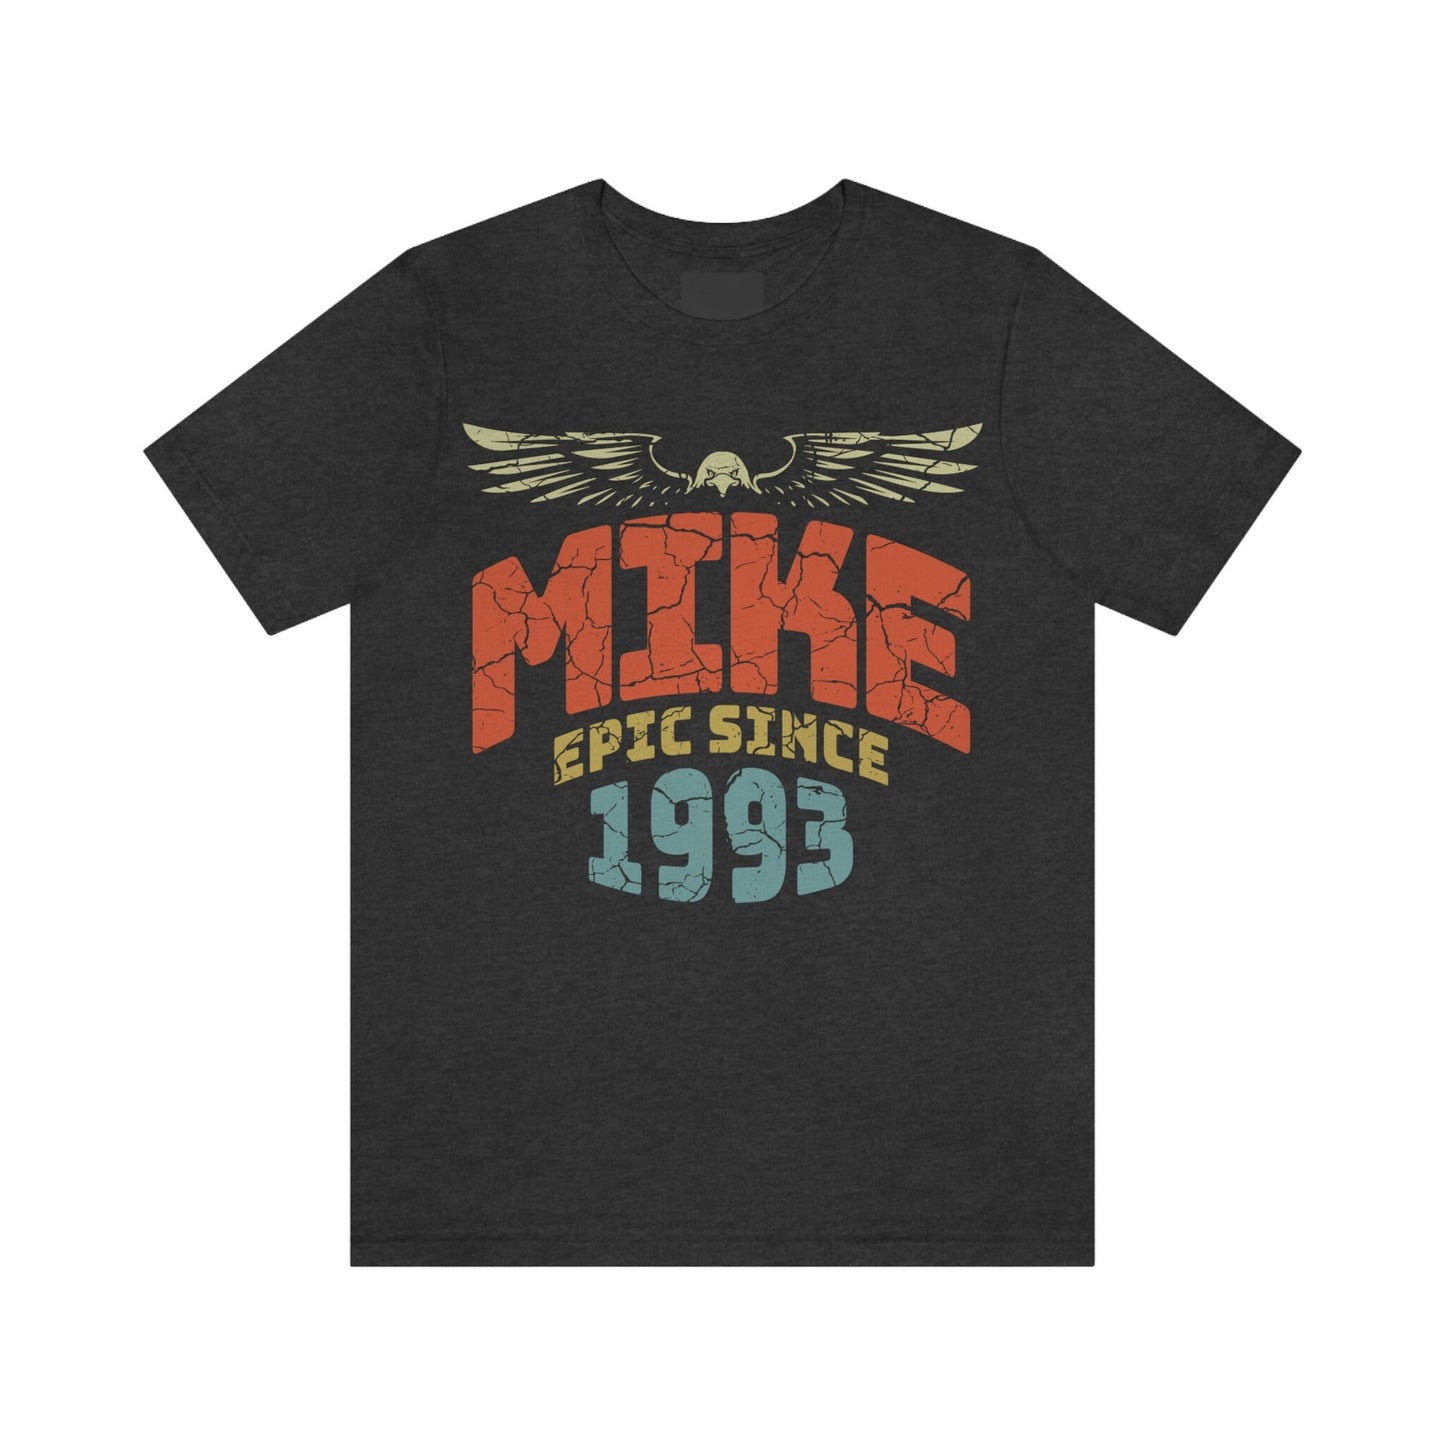 Personalized Name Epic Since 1993 Retro T-Shirt, Birthday Shirt, Gift For Him